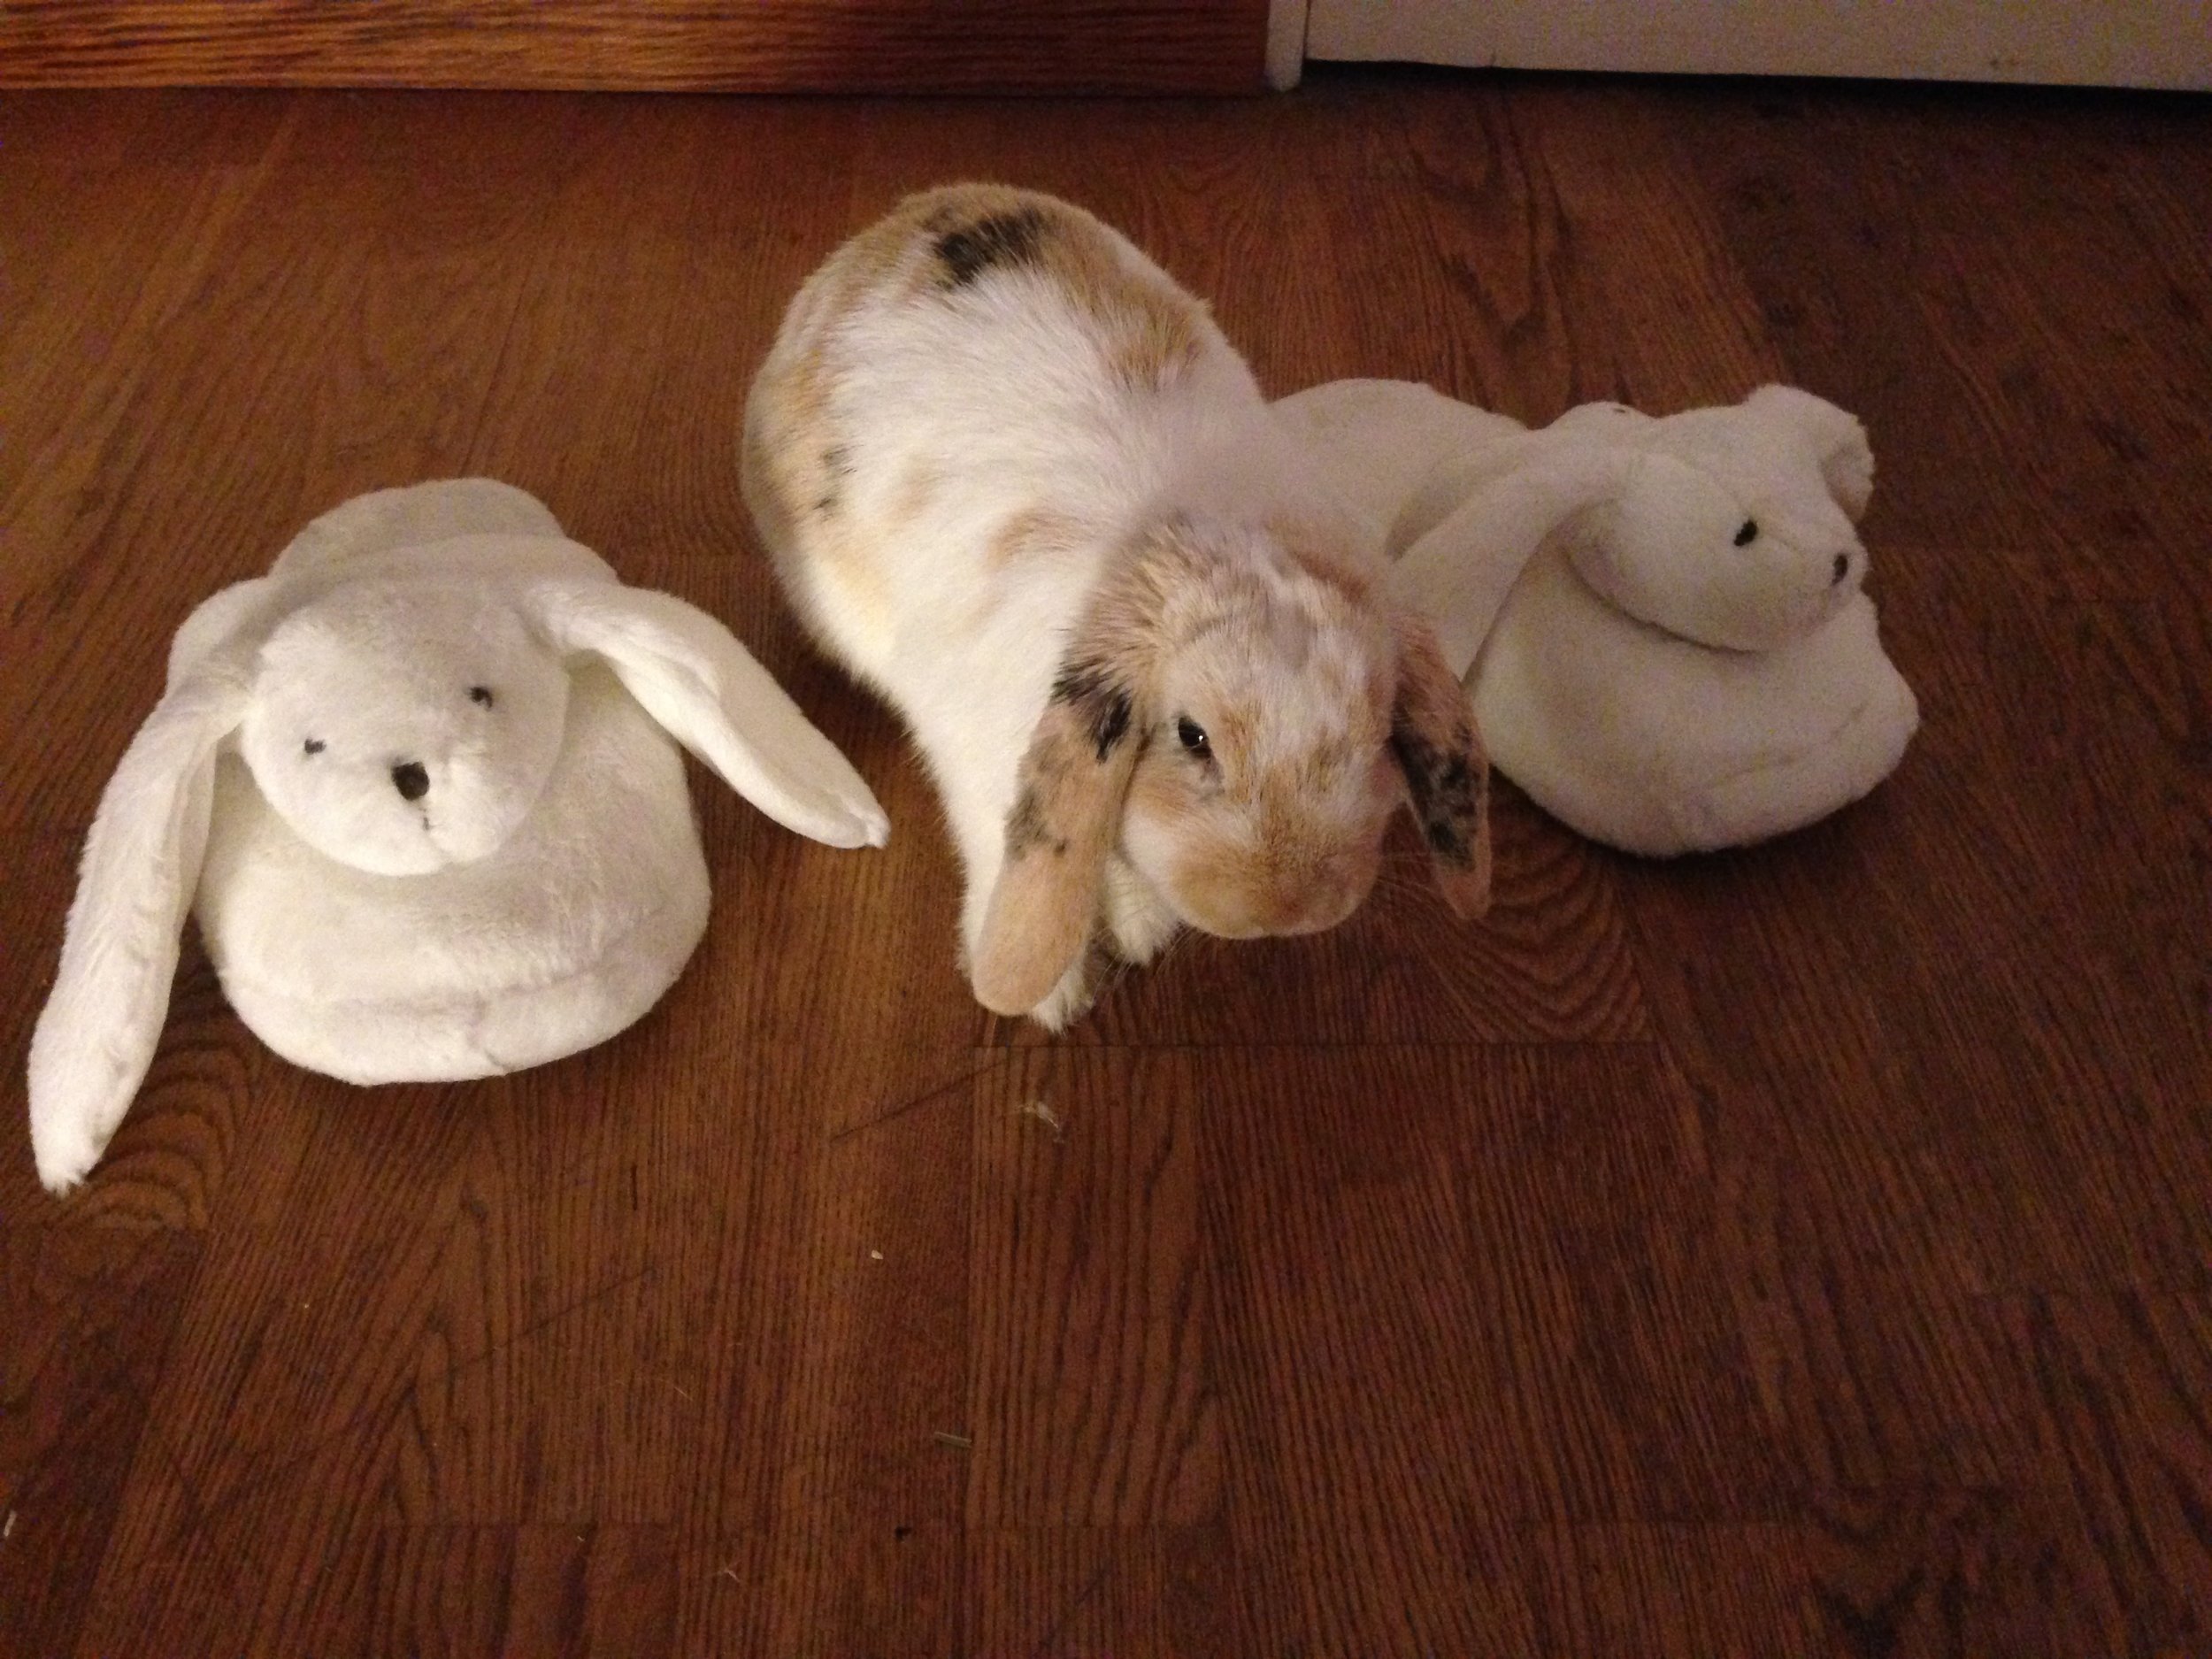 Bunny Hangs Out with Some Plush Friends 2